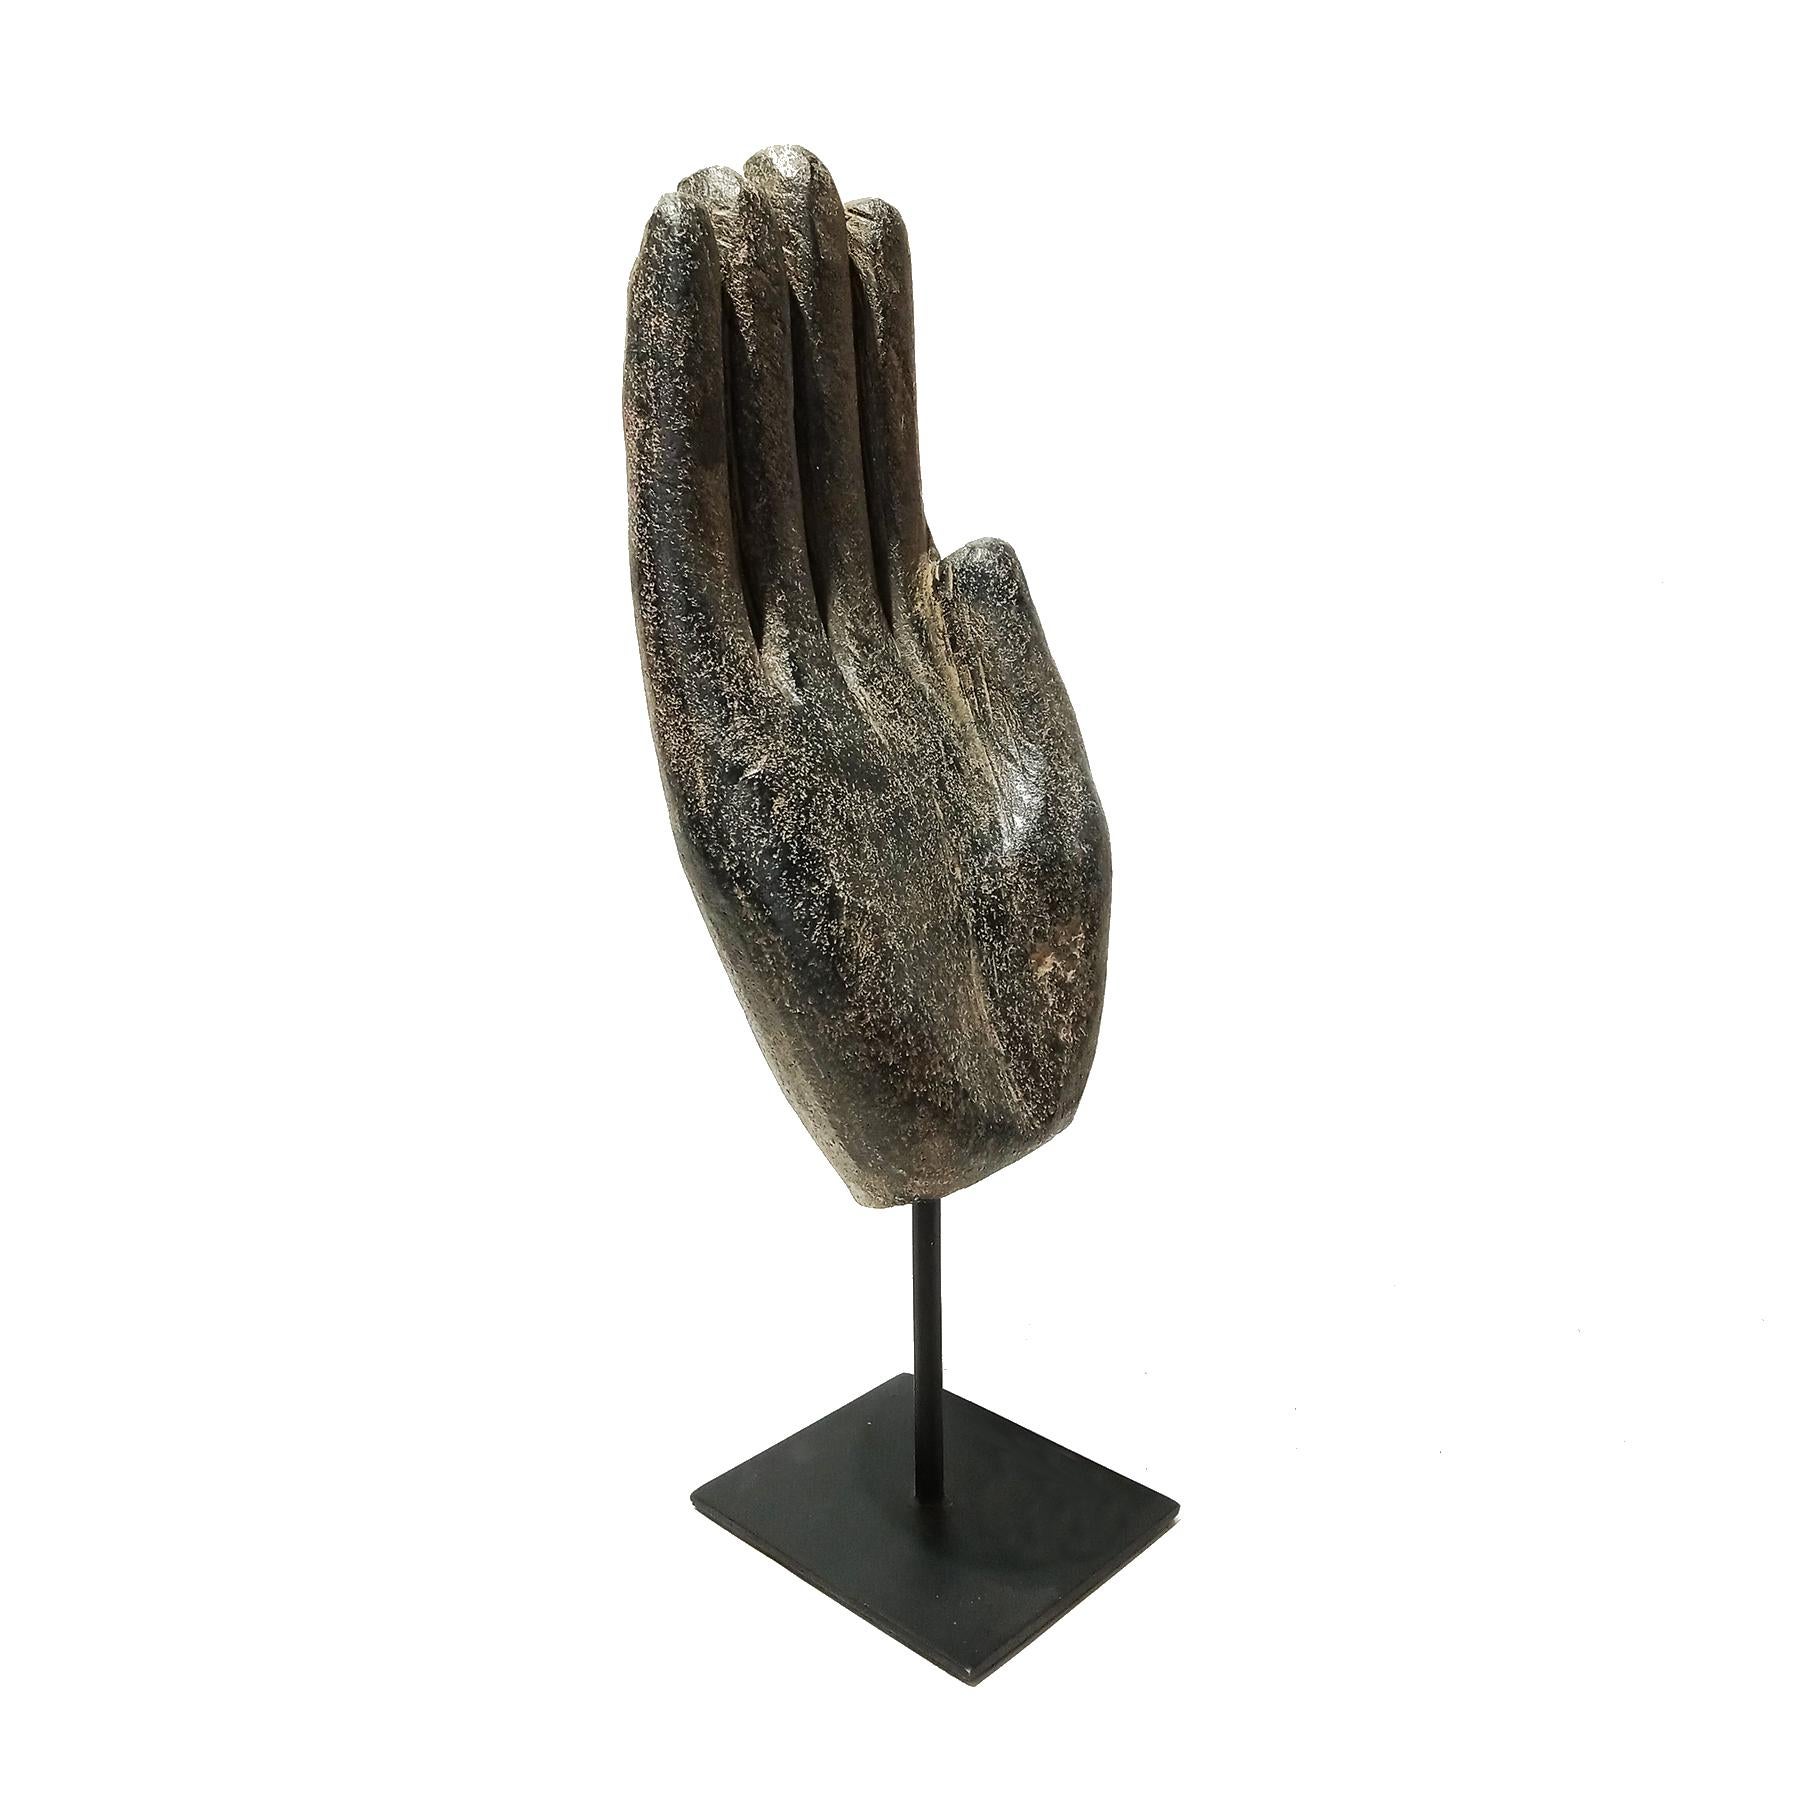 Indonesian Three Volcanic Rock Hand Sculptures, Mid 20th Century For Sale